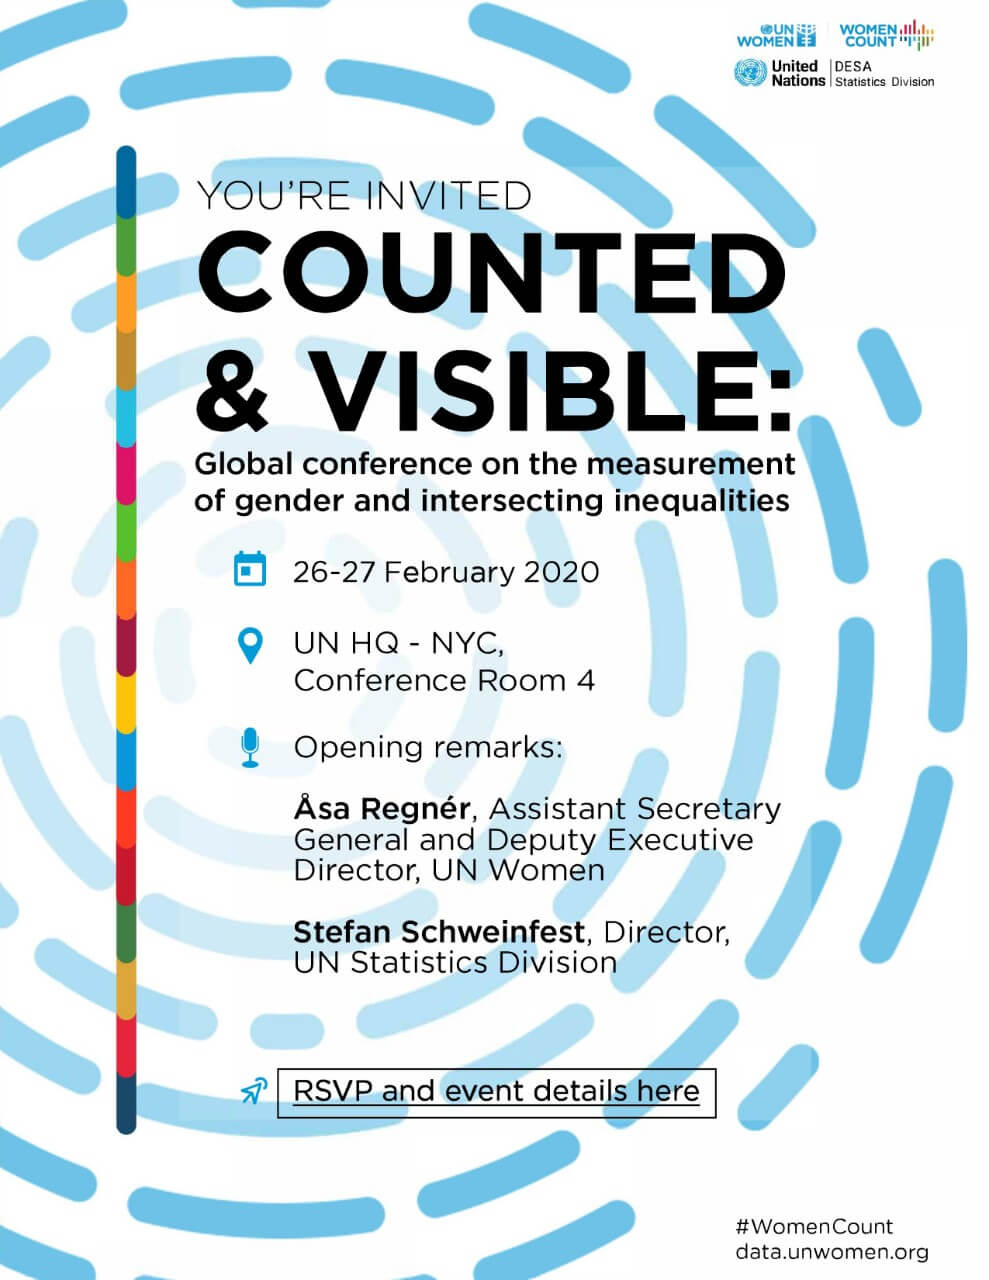 Counted and visible: Global conference on the measurement of gender and intersecting inequalities